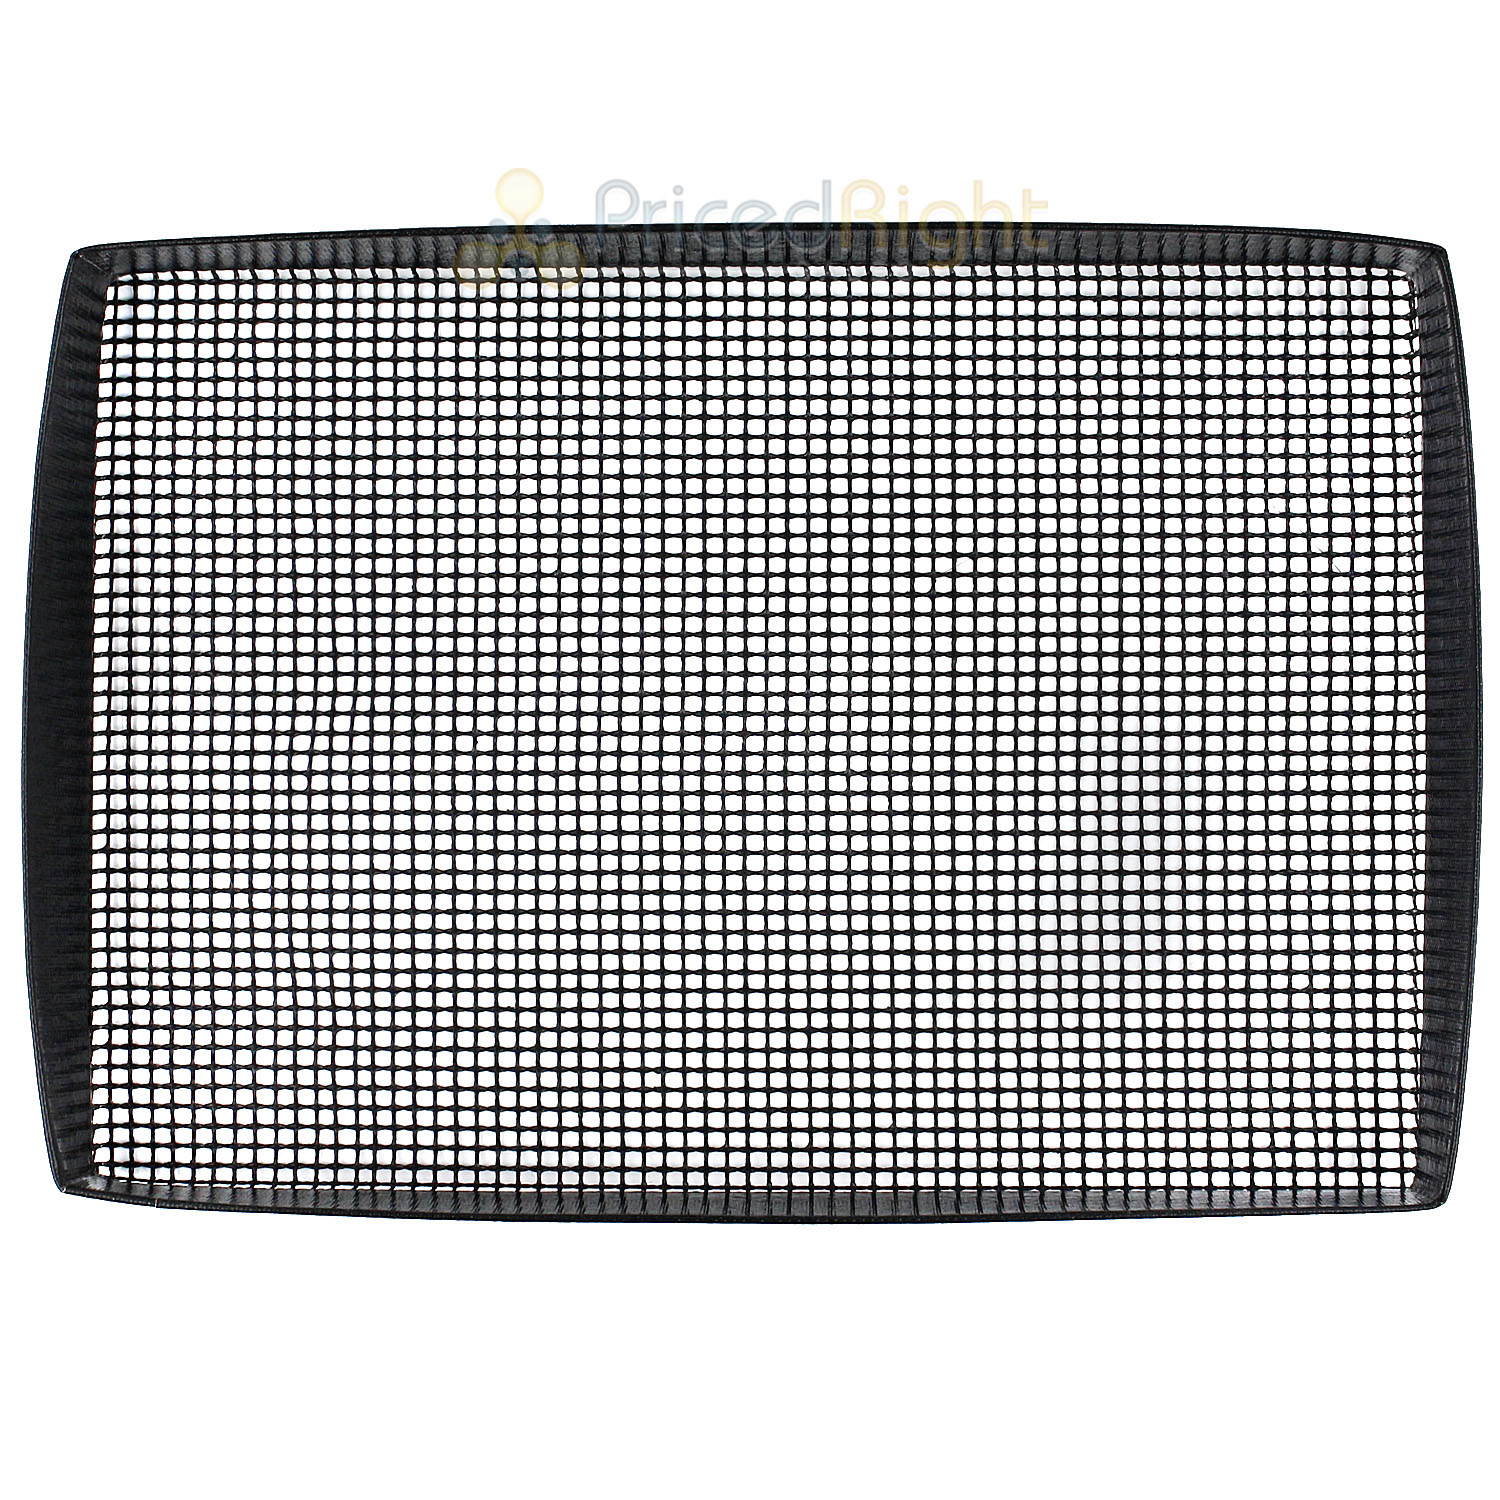 Heavy Duty Smoker BBQ Grill Basket 16.5" x 11.6" x 1.5" Non-Stick PTFE Wide Mesh Essentialware SNS111655 - image 2 of 3